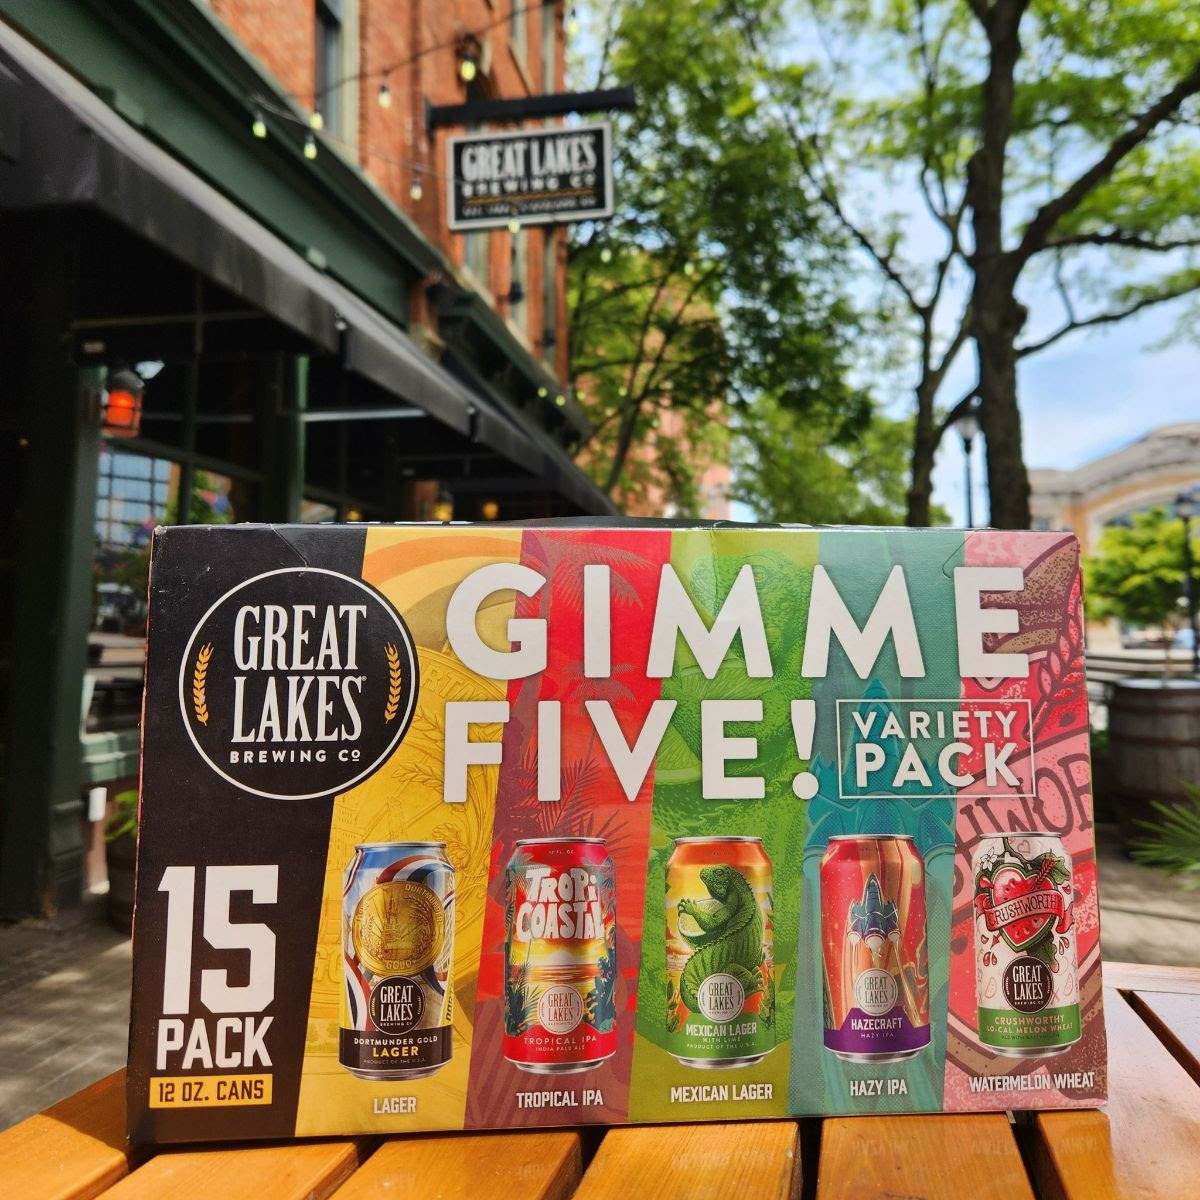 Summer edition of Gimme Five! Variety Pack.